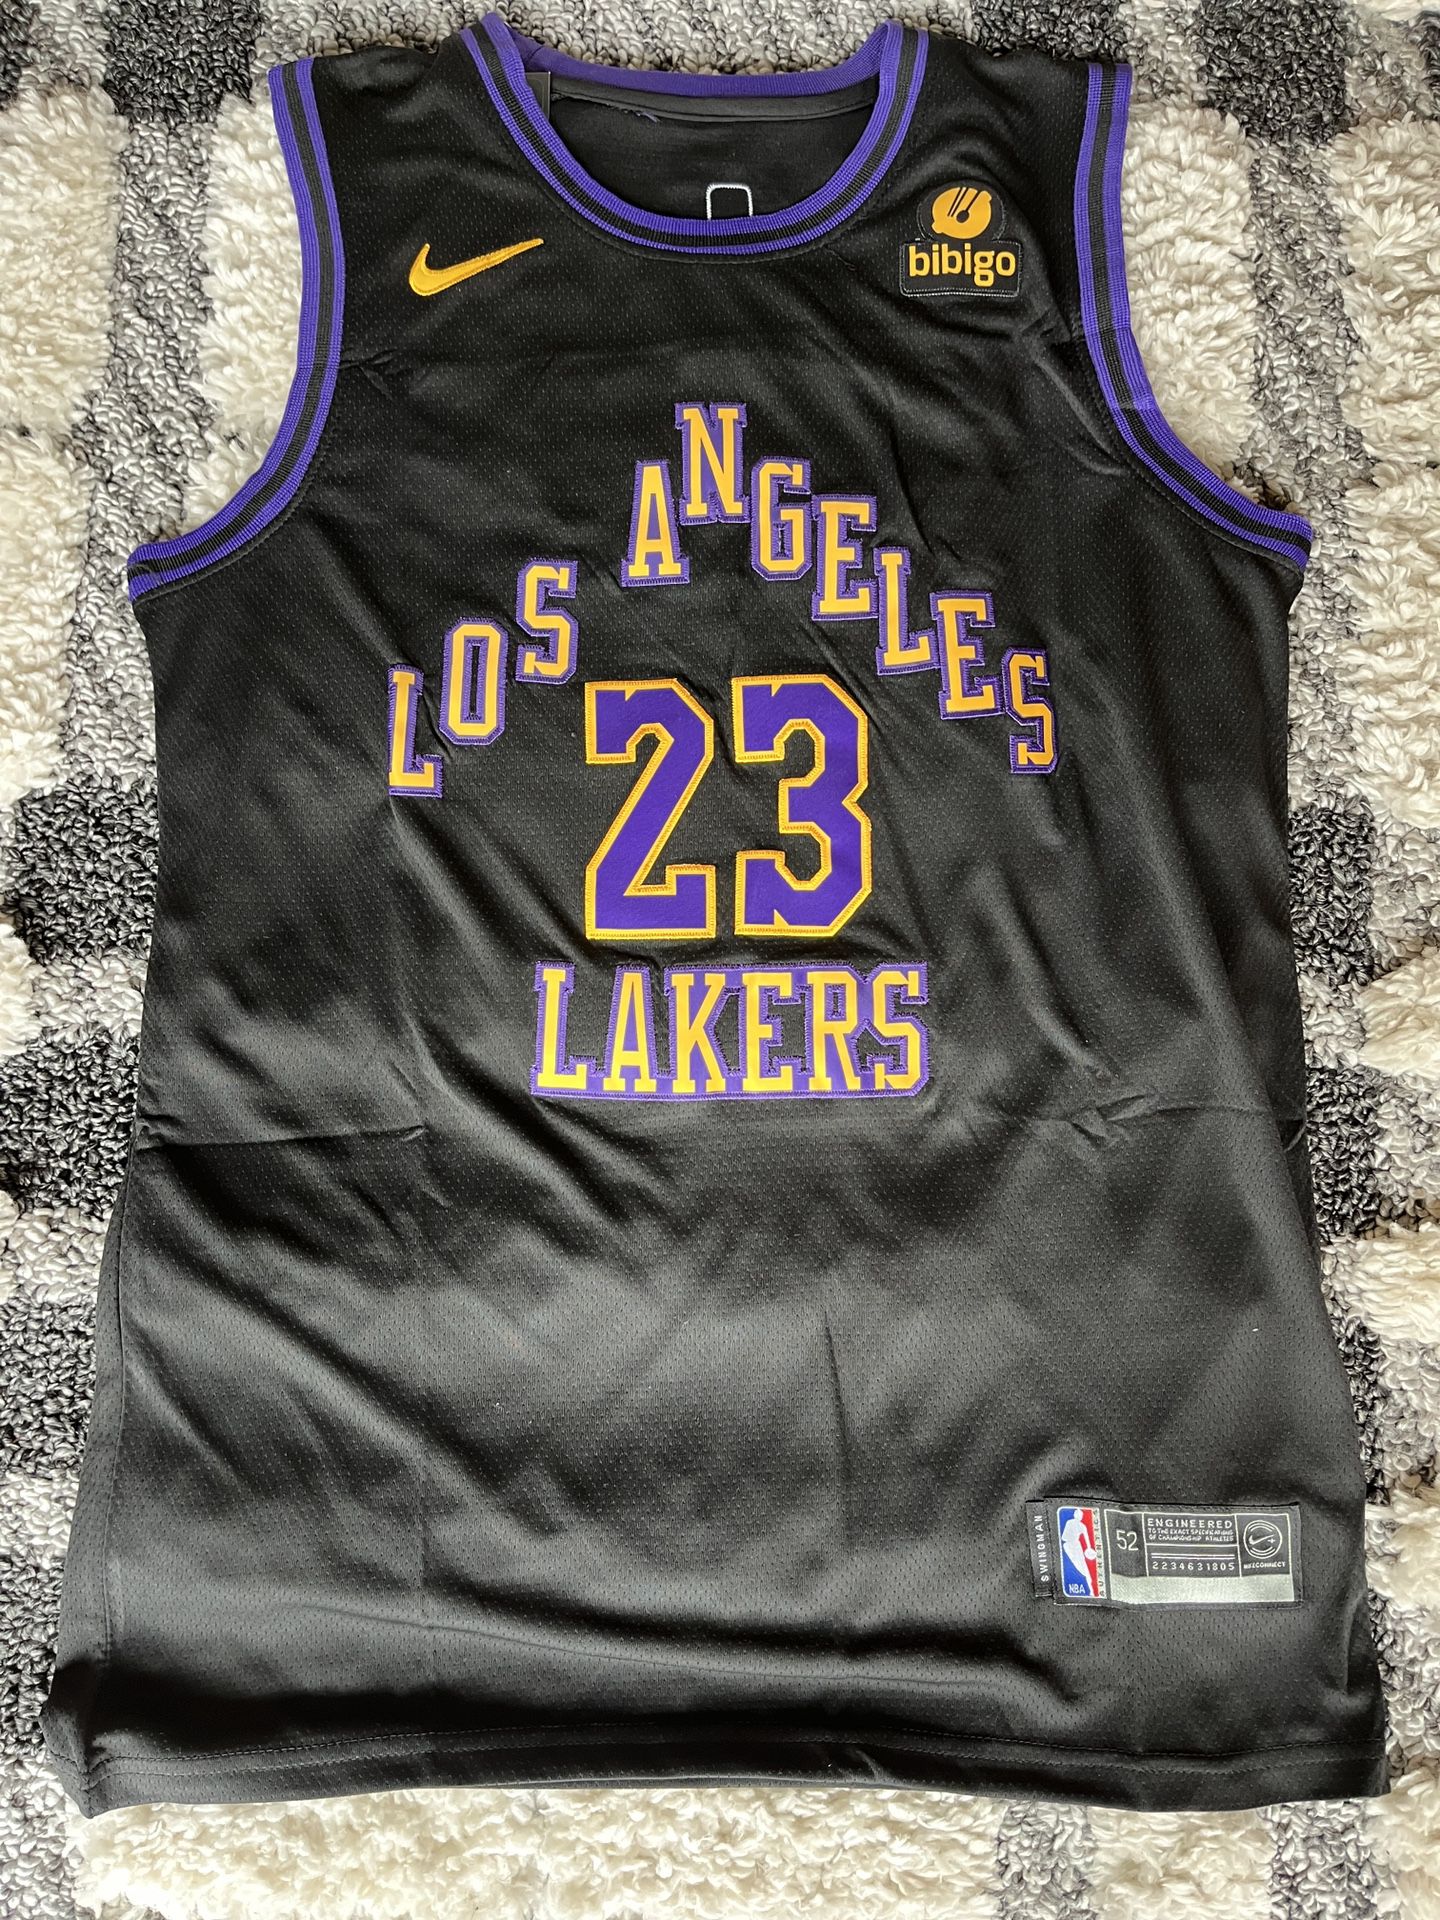 Lebron James - XL Jersey - Los Angeles Lakers 